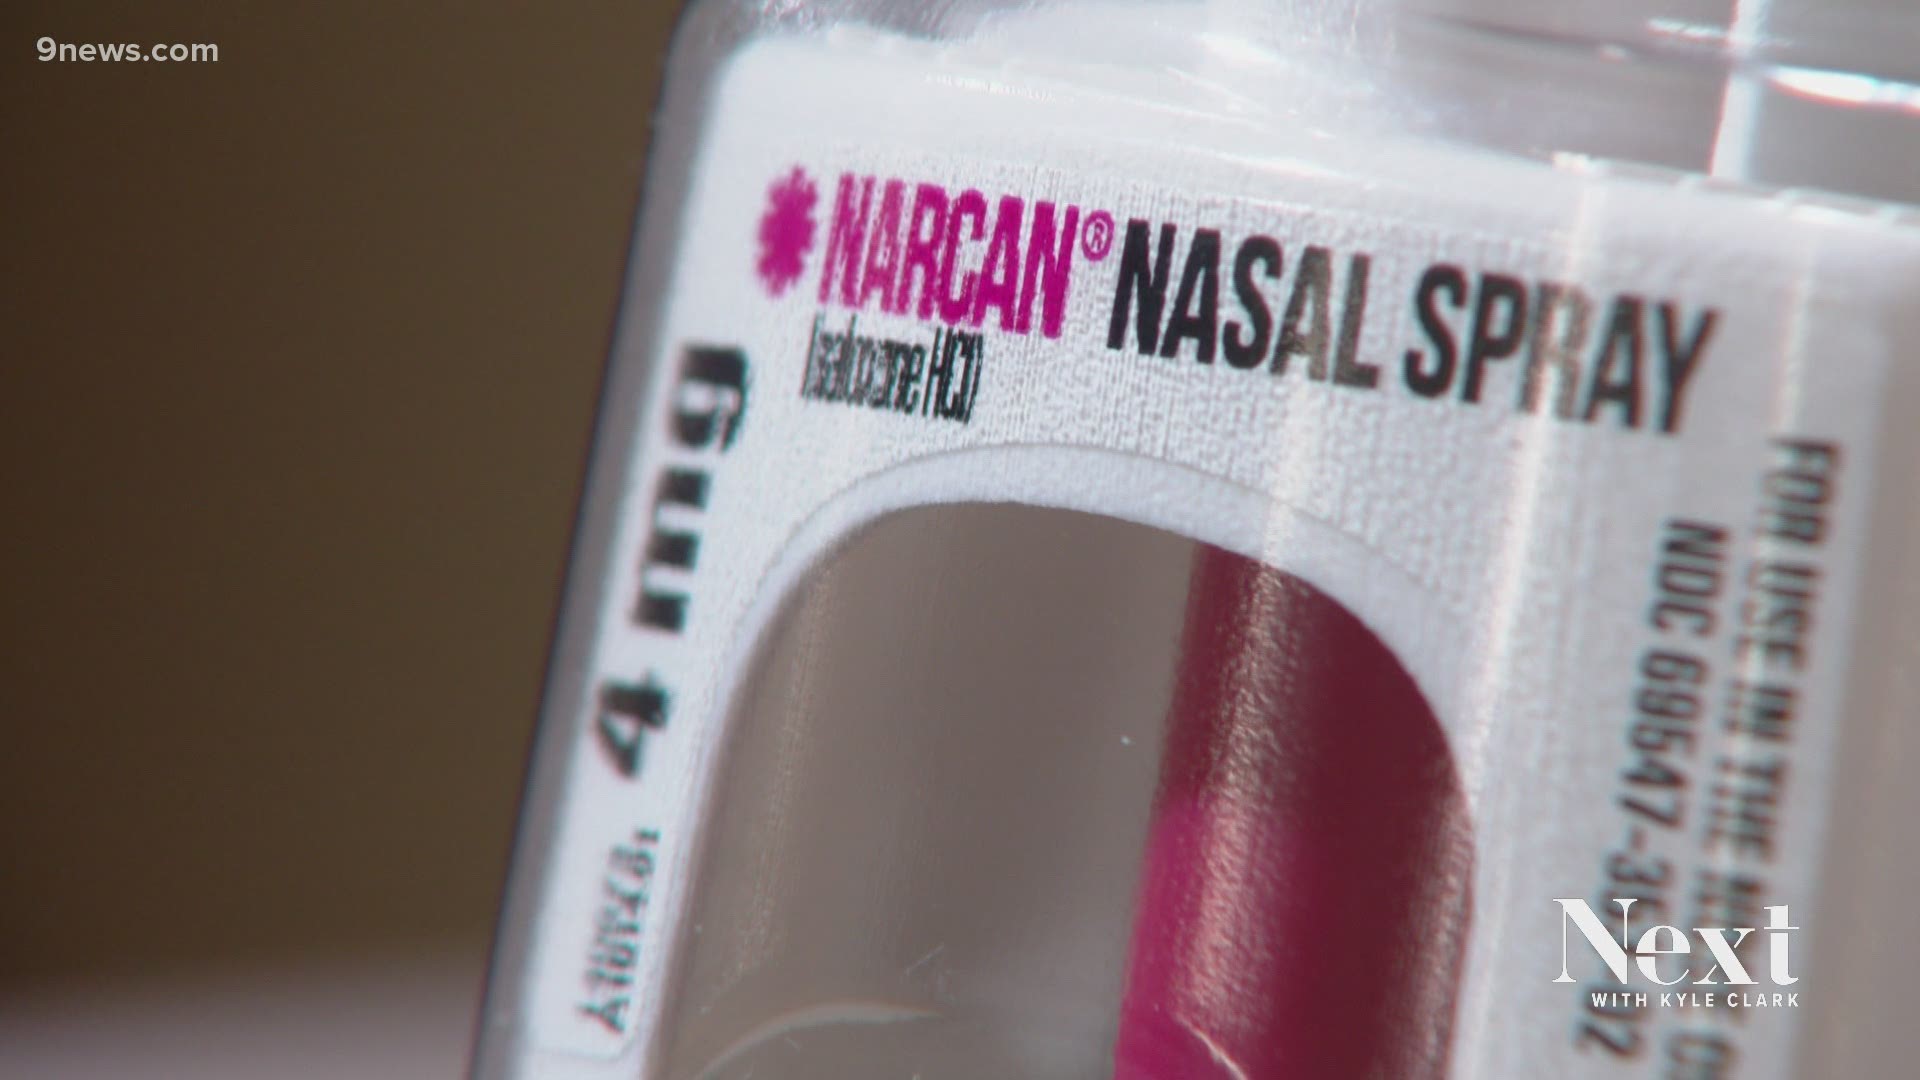 The Colorado Naloxone Project is attempting a new approach to battling the opioid crisis, making sure patients leave ERs with the nasal spray to reverse overdoses.